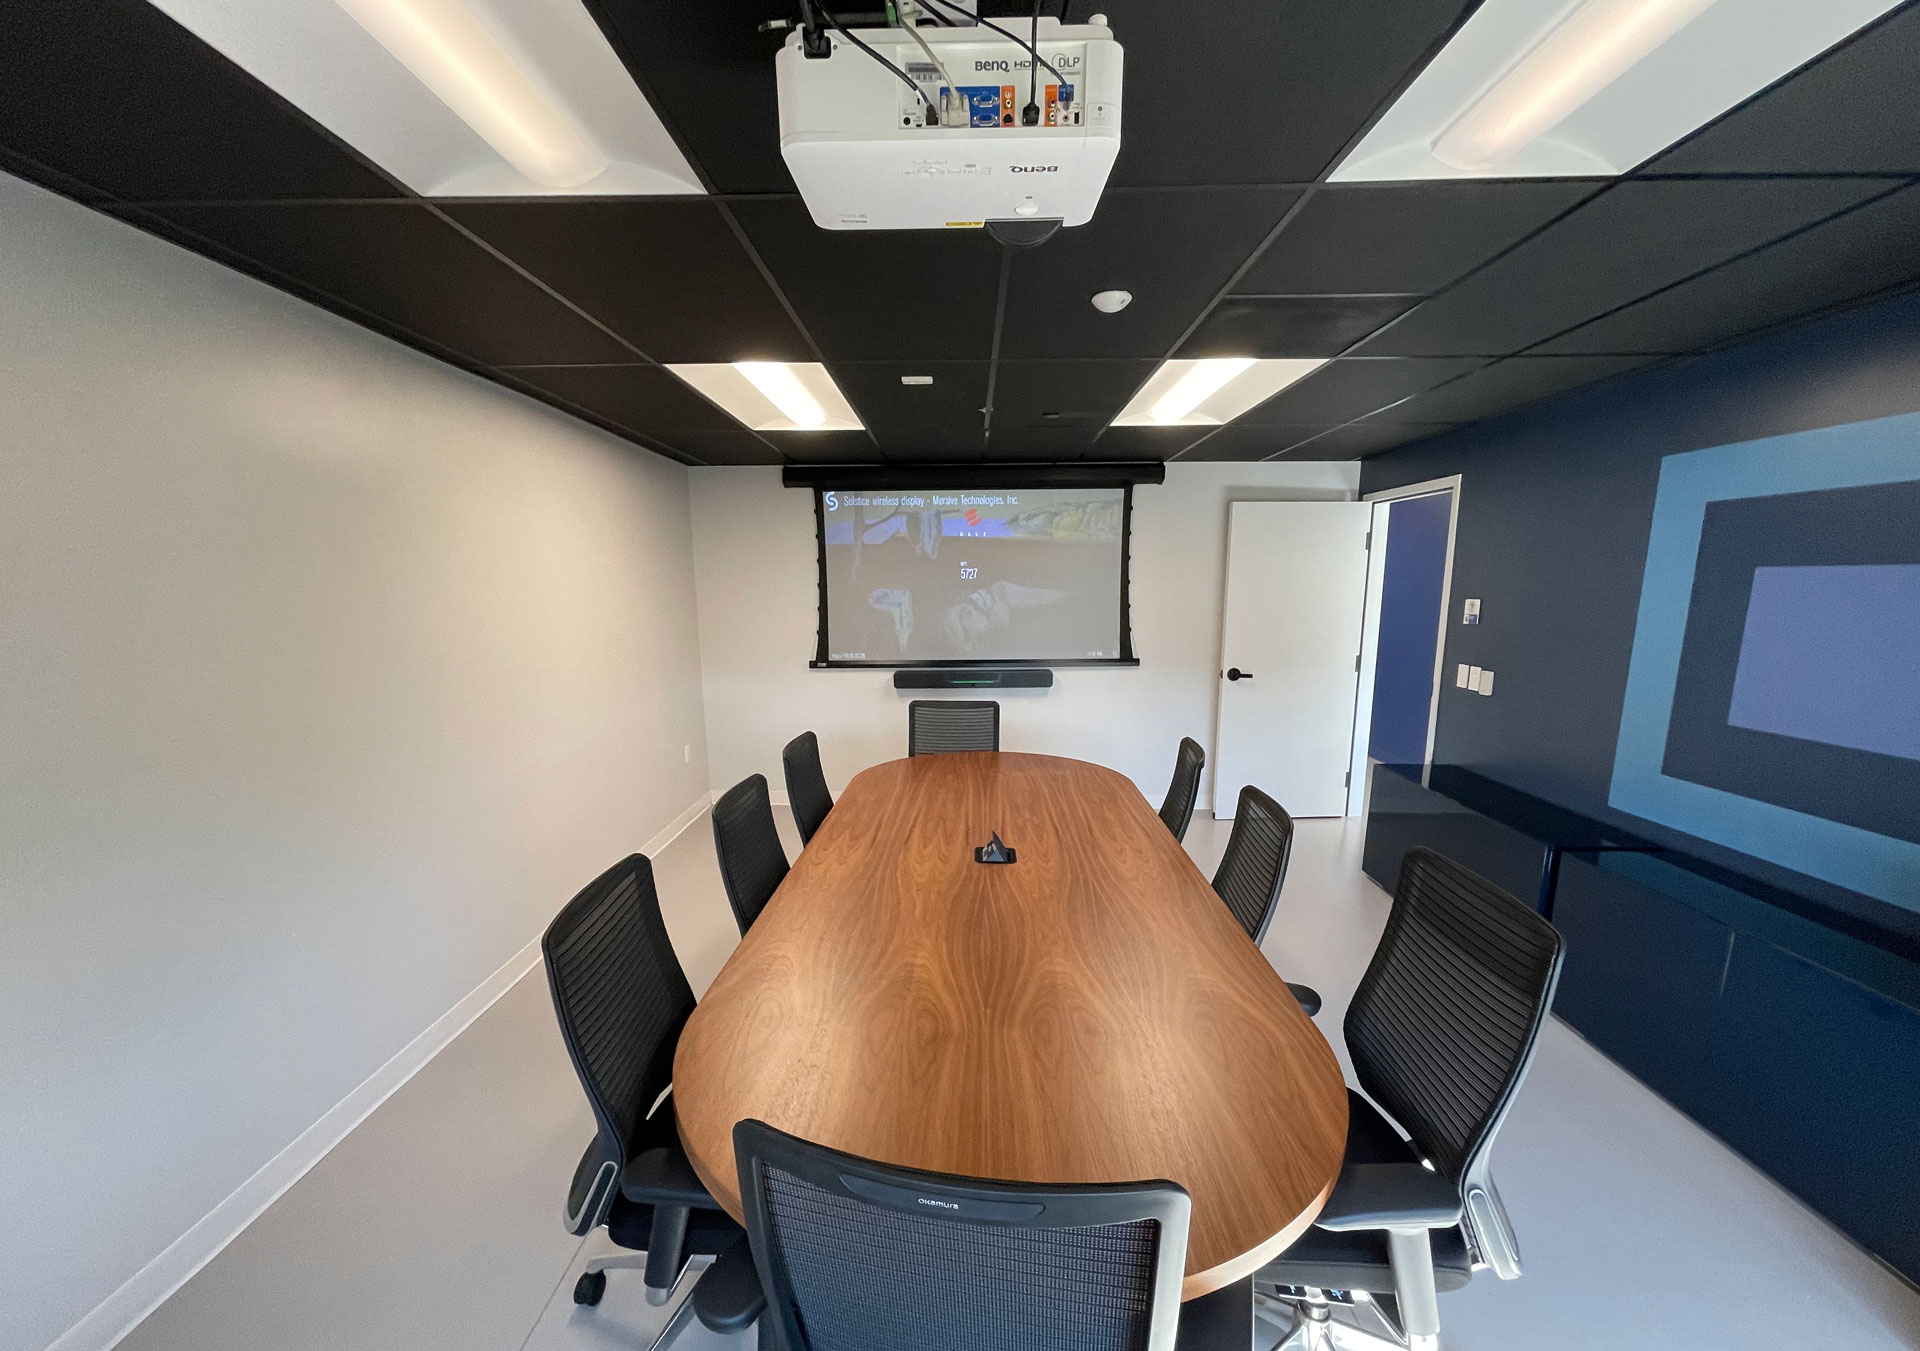 conference room with ceiling projector